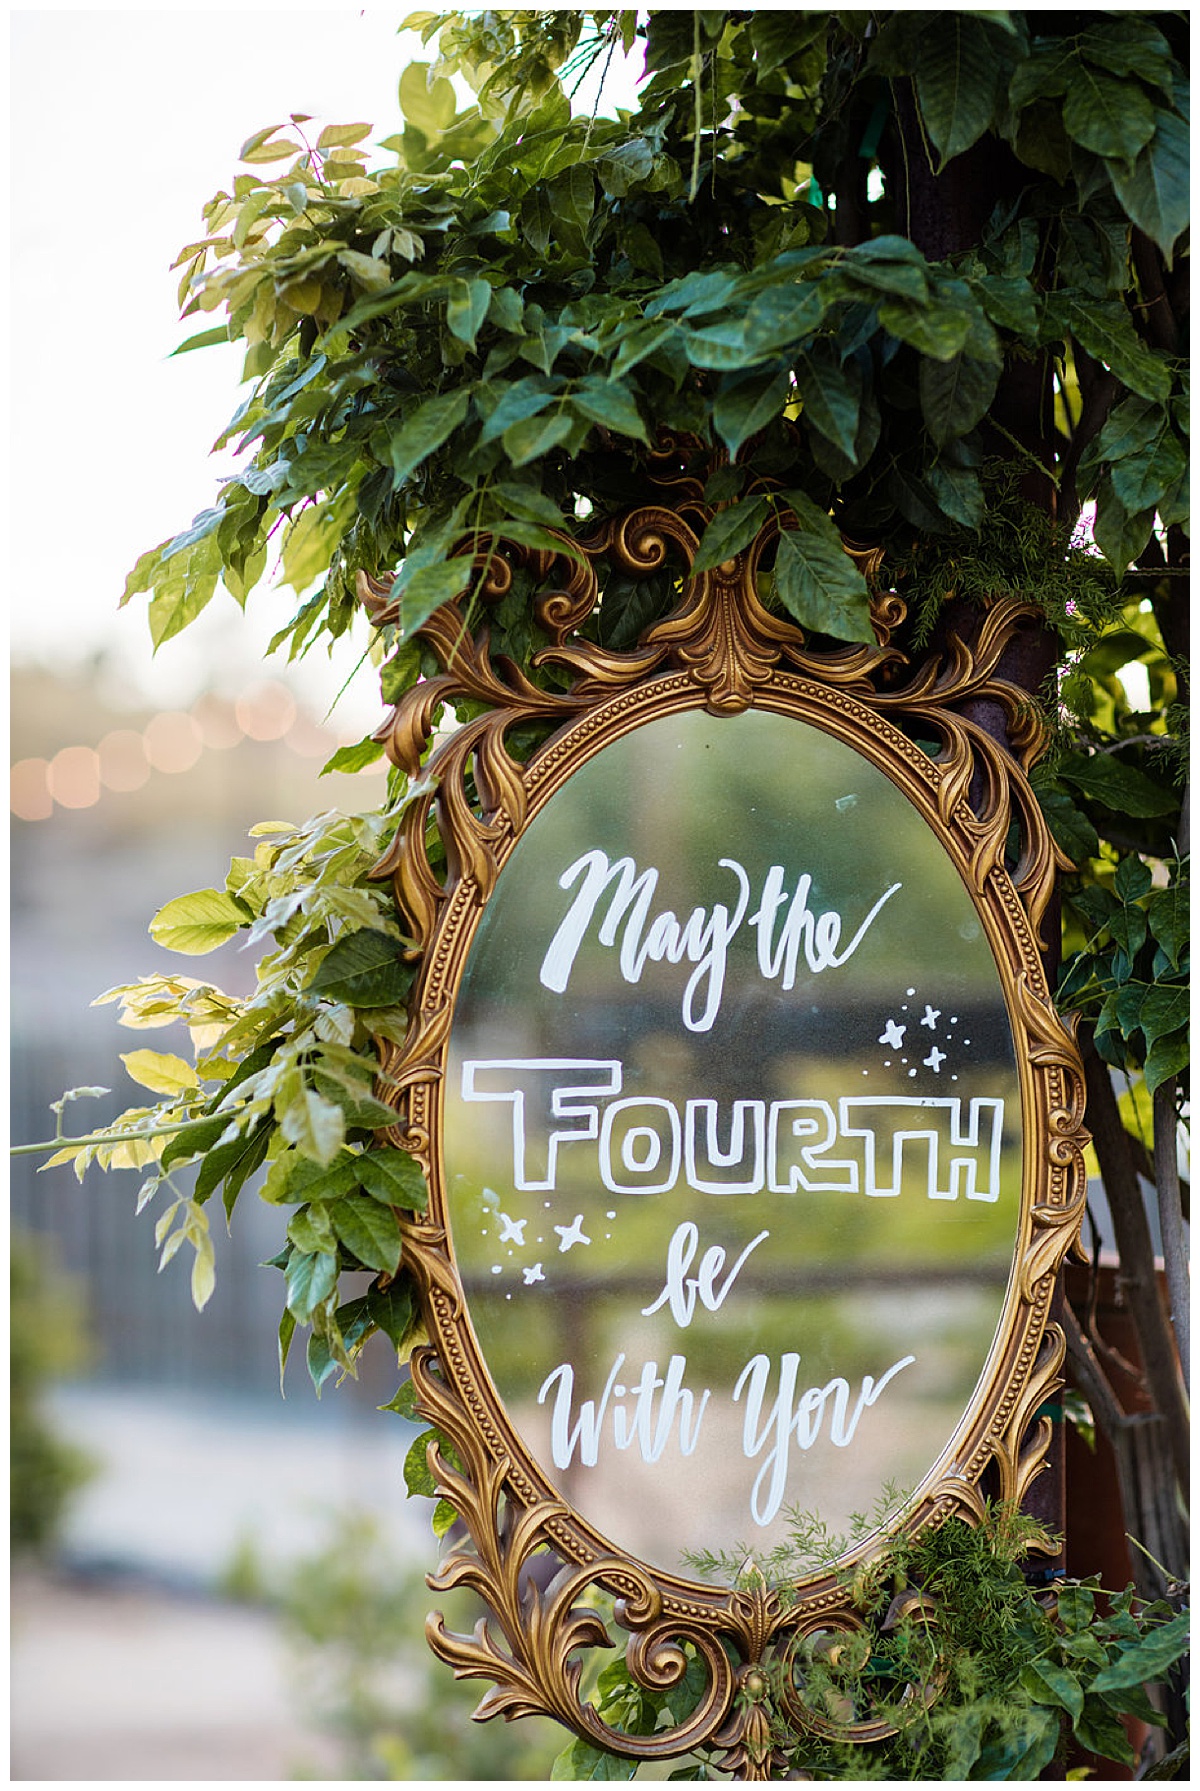 Reception Sign for a Star Wars themed wedding